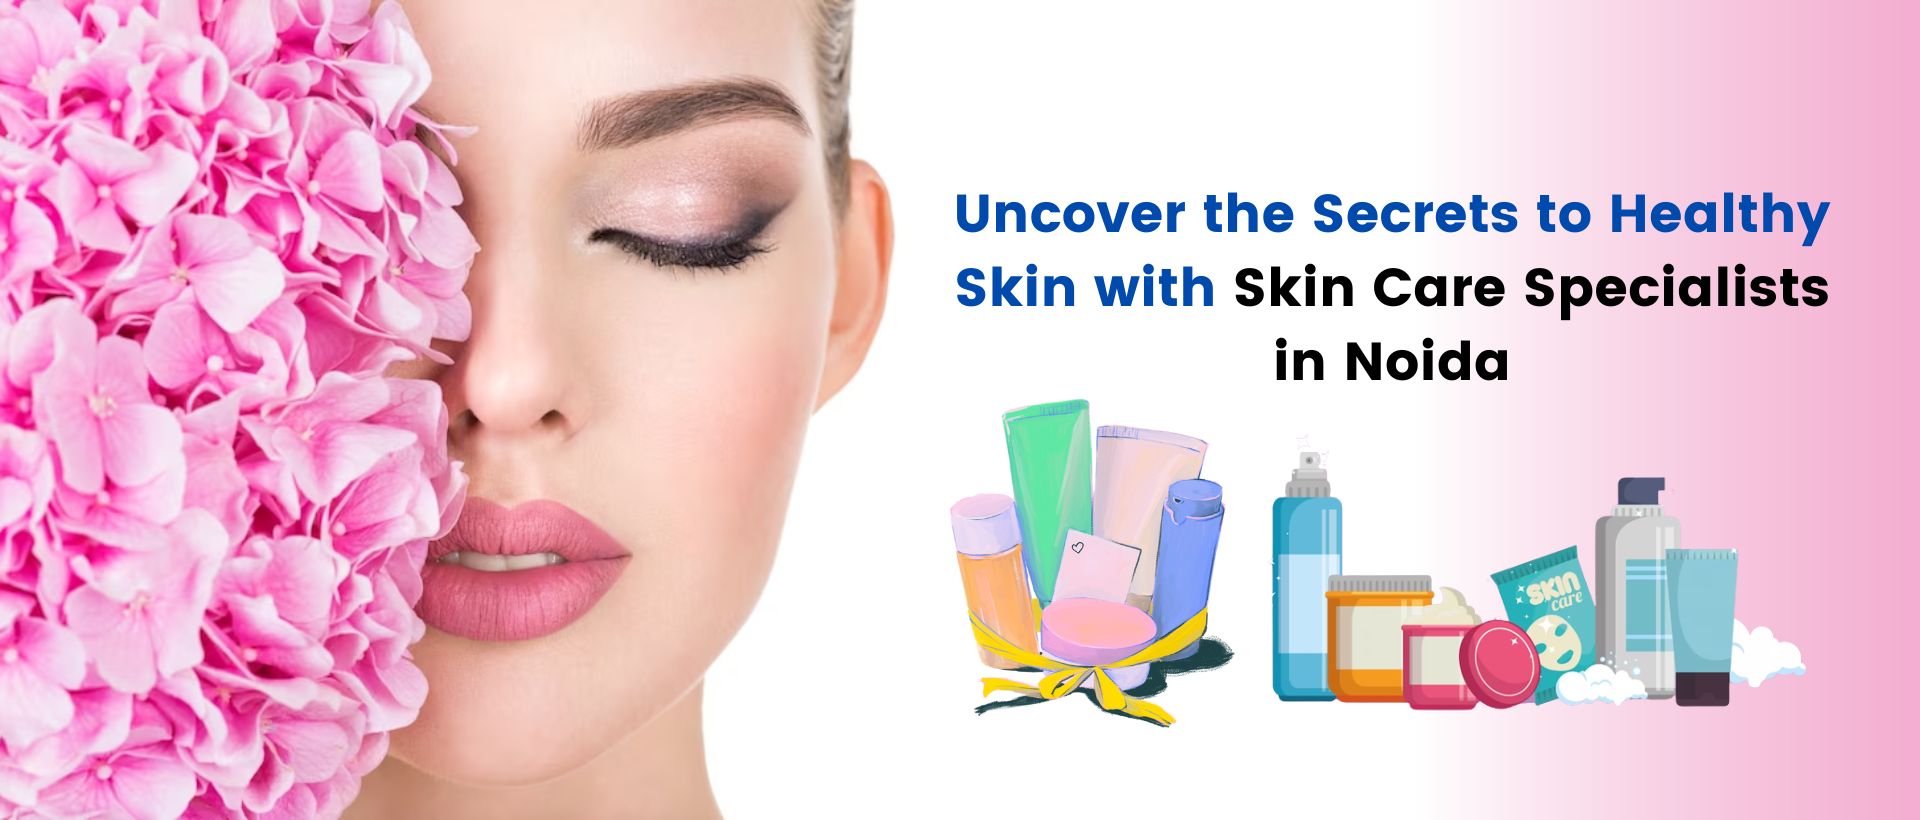 Uncover the secrets to healthy skin with skin care specialists in noida